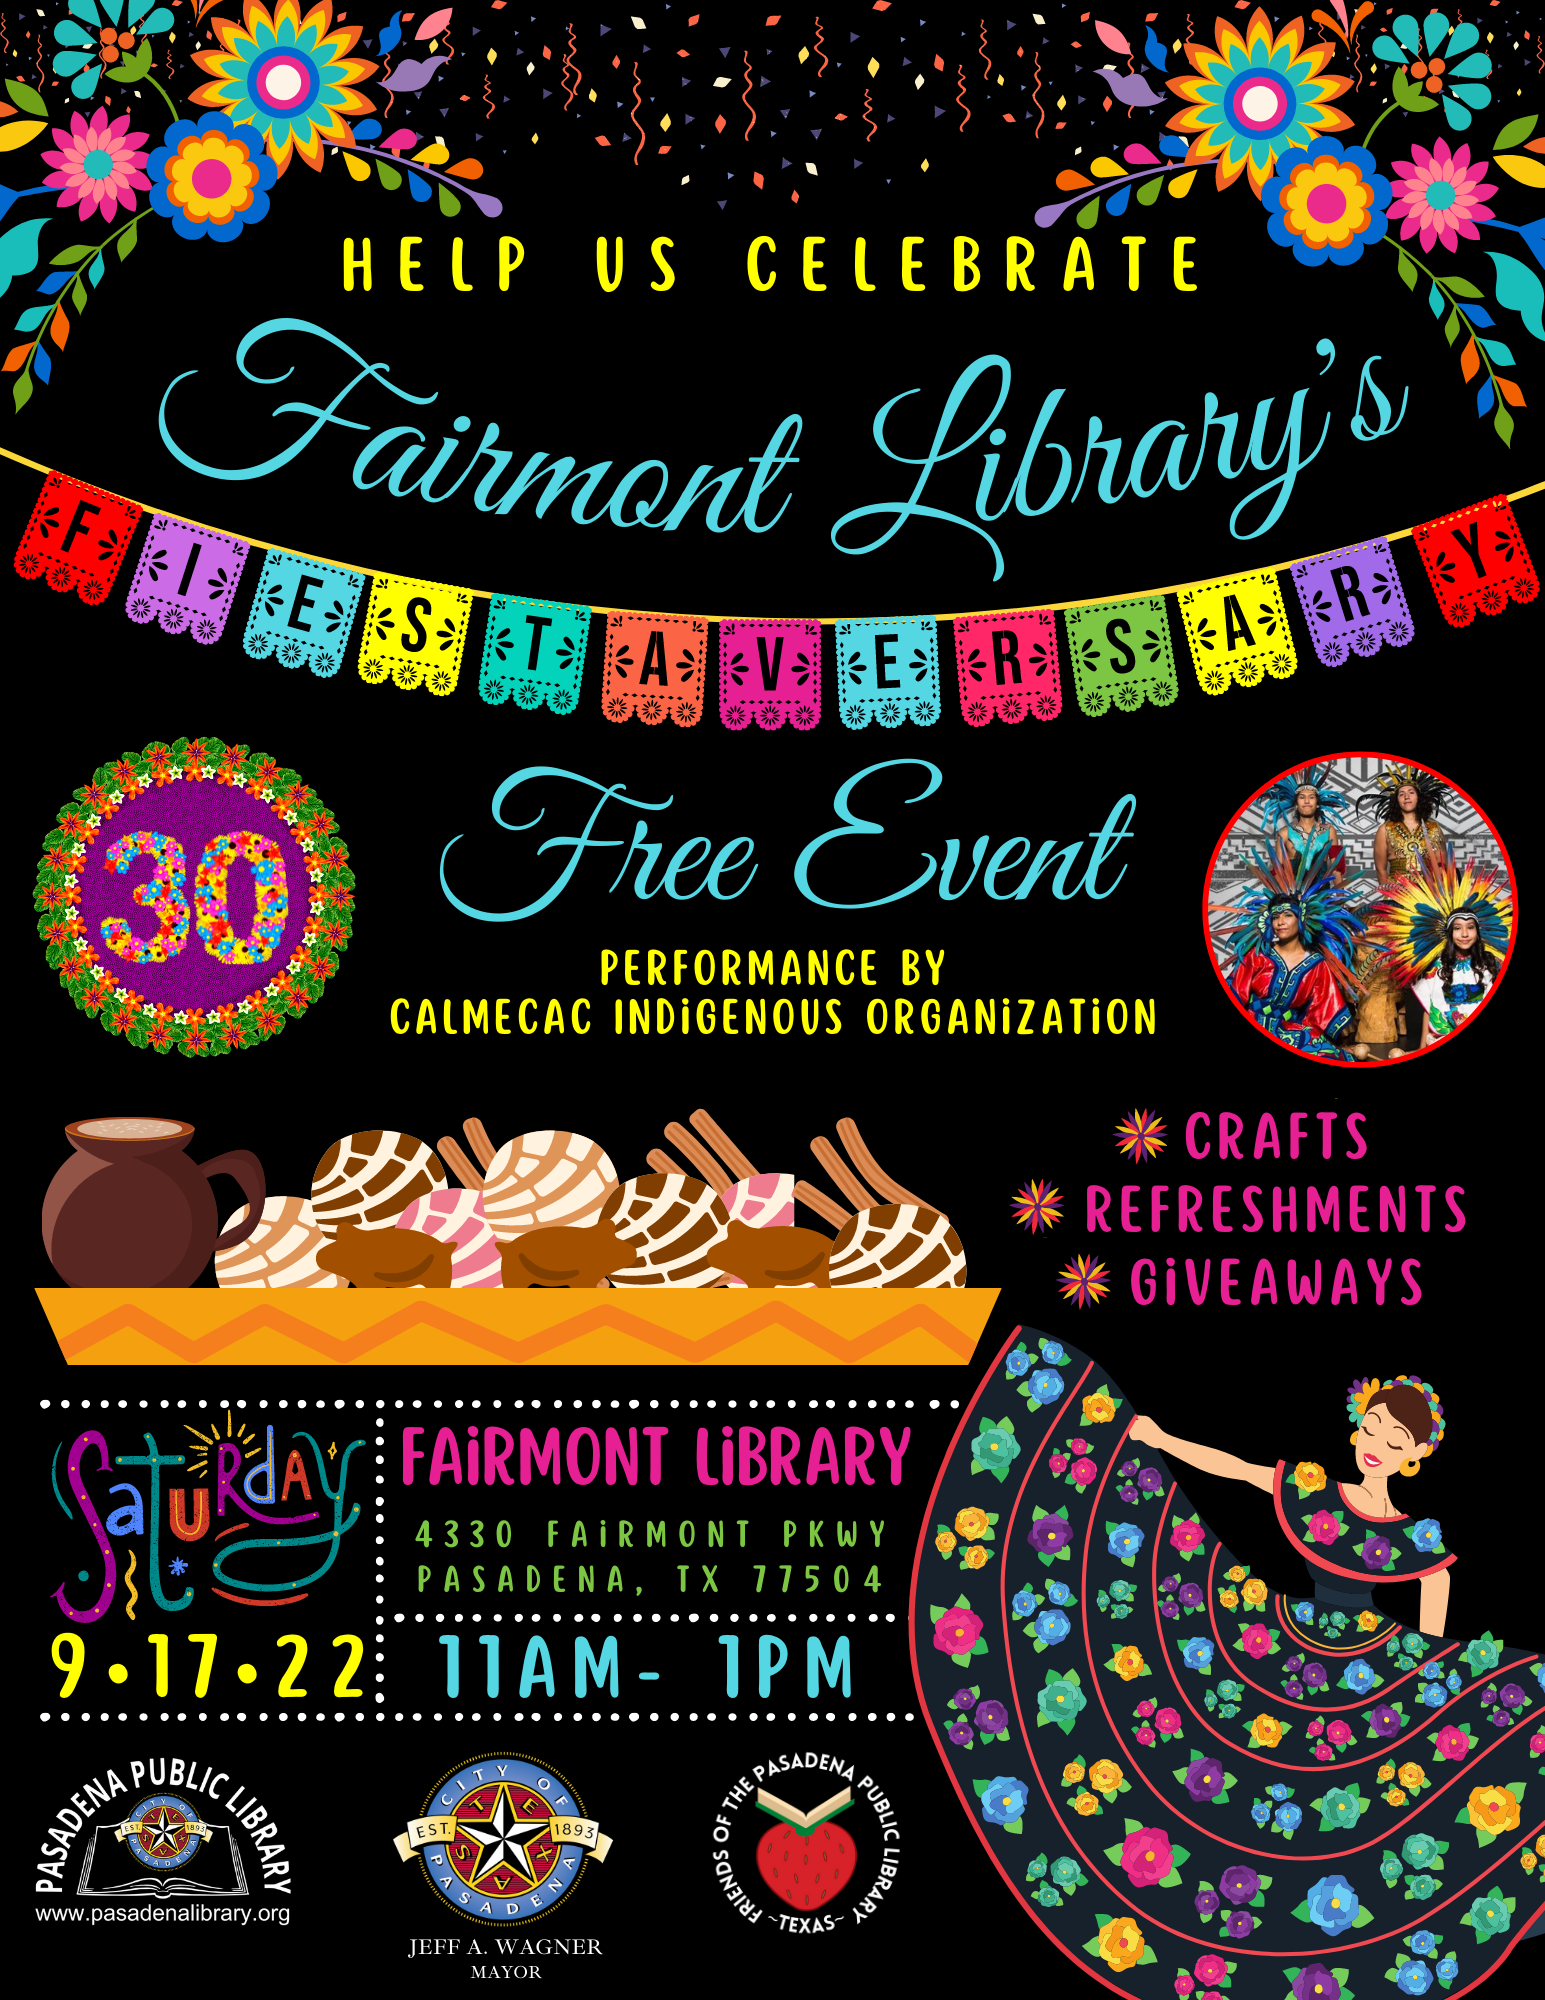 Fairmont Library's 30th Fiestaversary | Saturday, September 17, 2022 from 11AM to 1PM